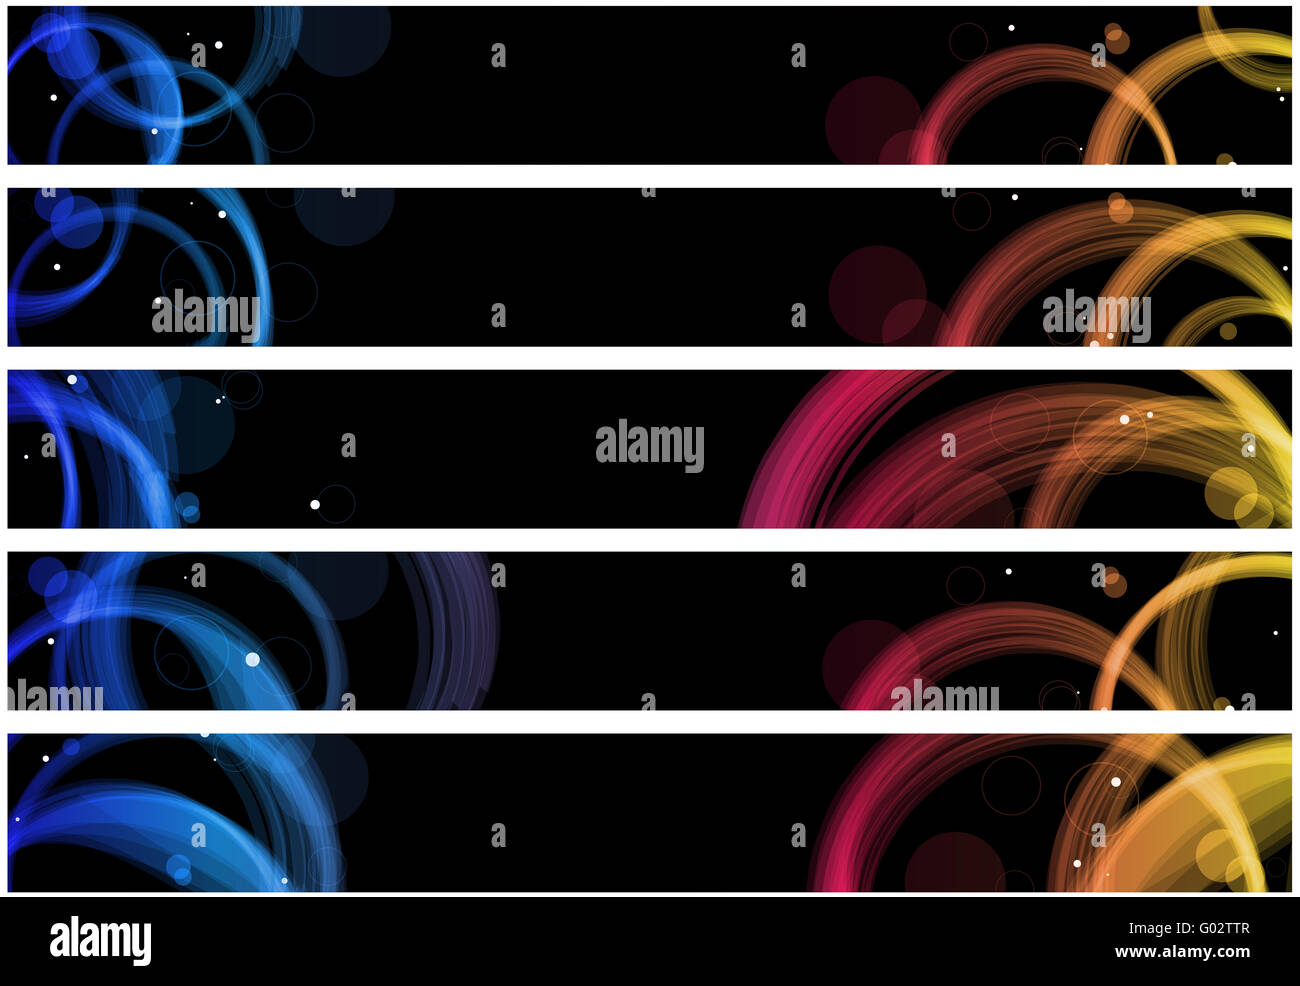 Abstract colorful circles web banners. Size 728x90 px Stock Photo